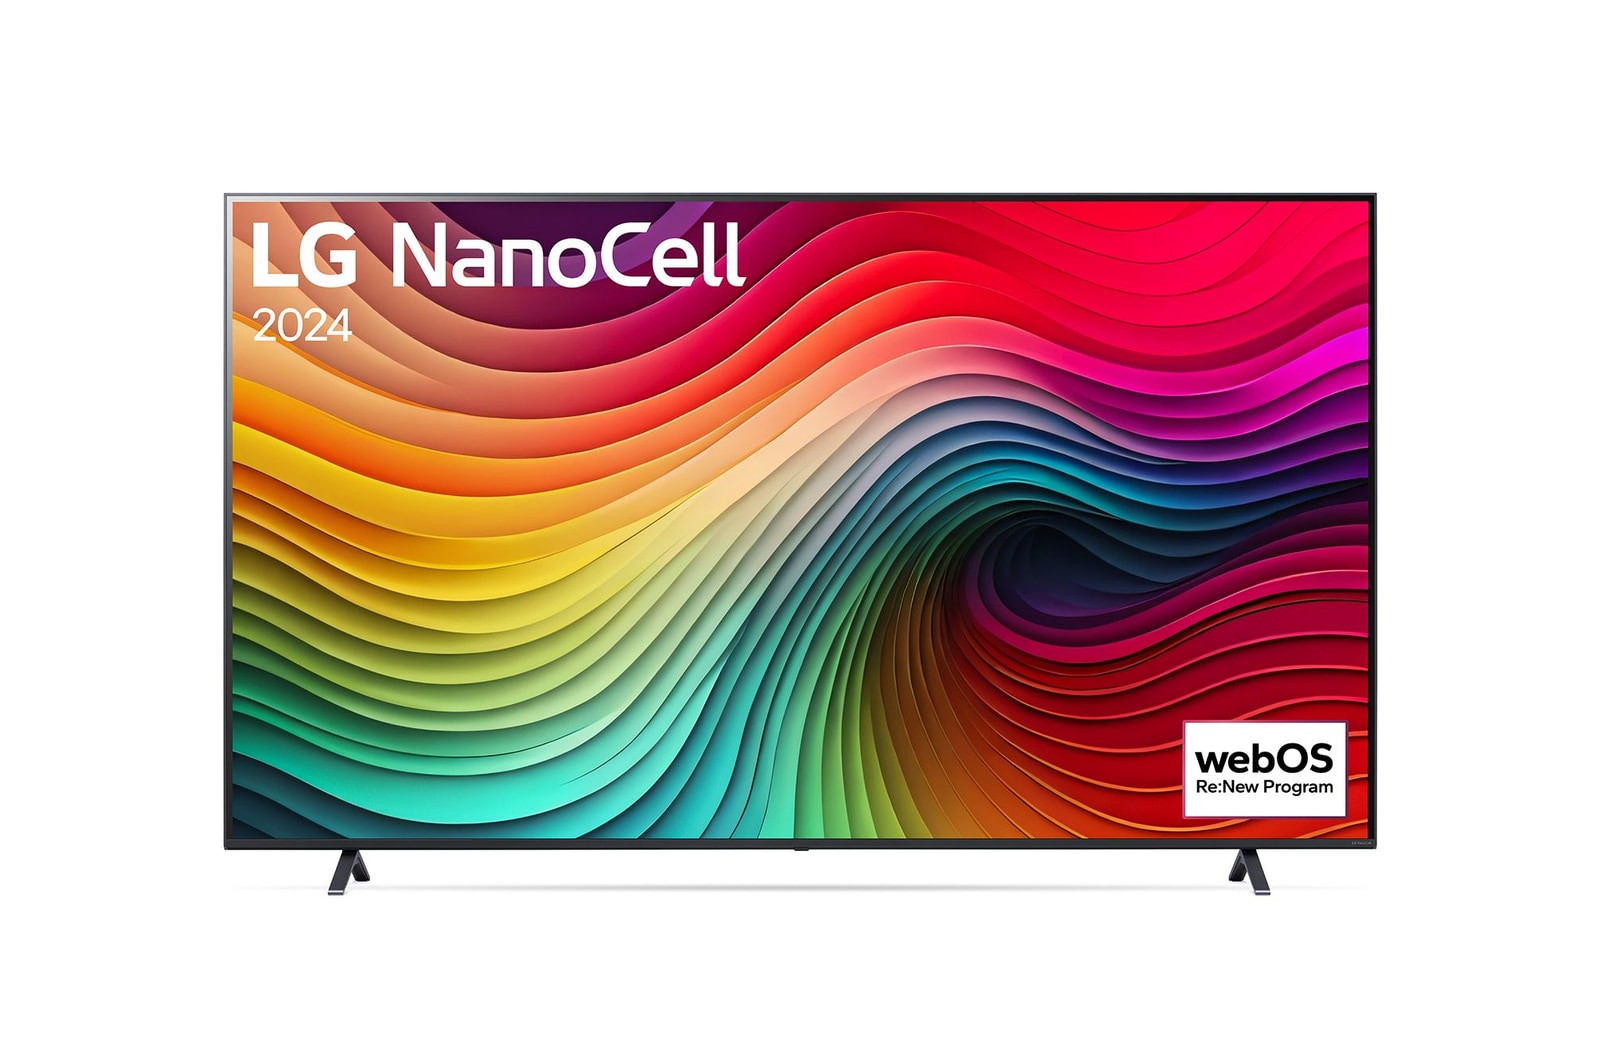 Front view of LG NanoCell TV with text of LG NanoCell and 2024 on screen